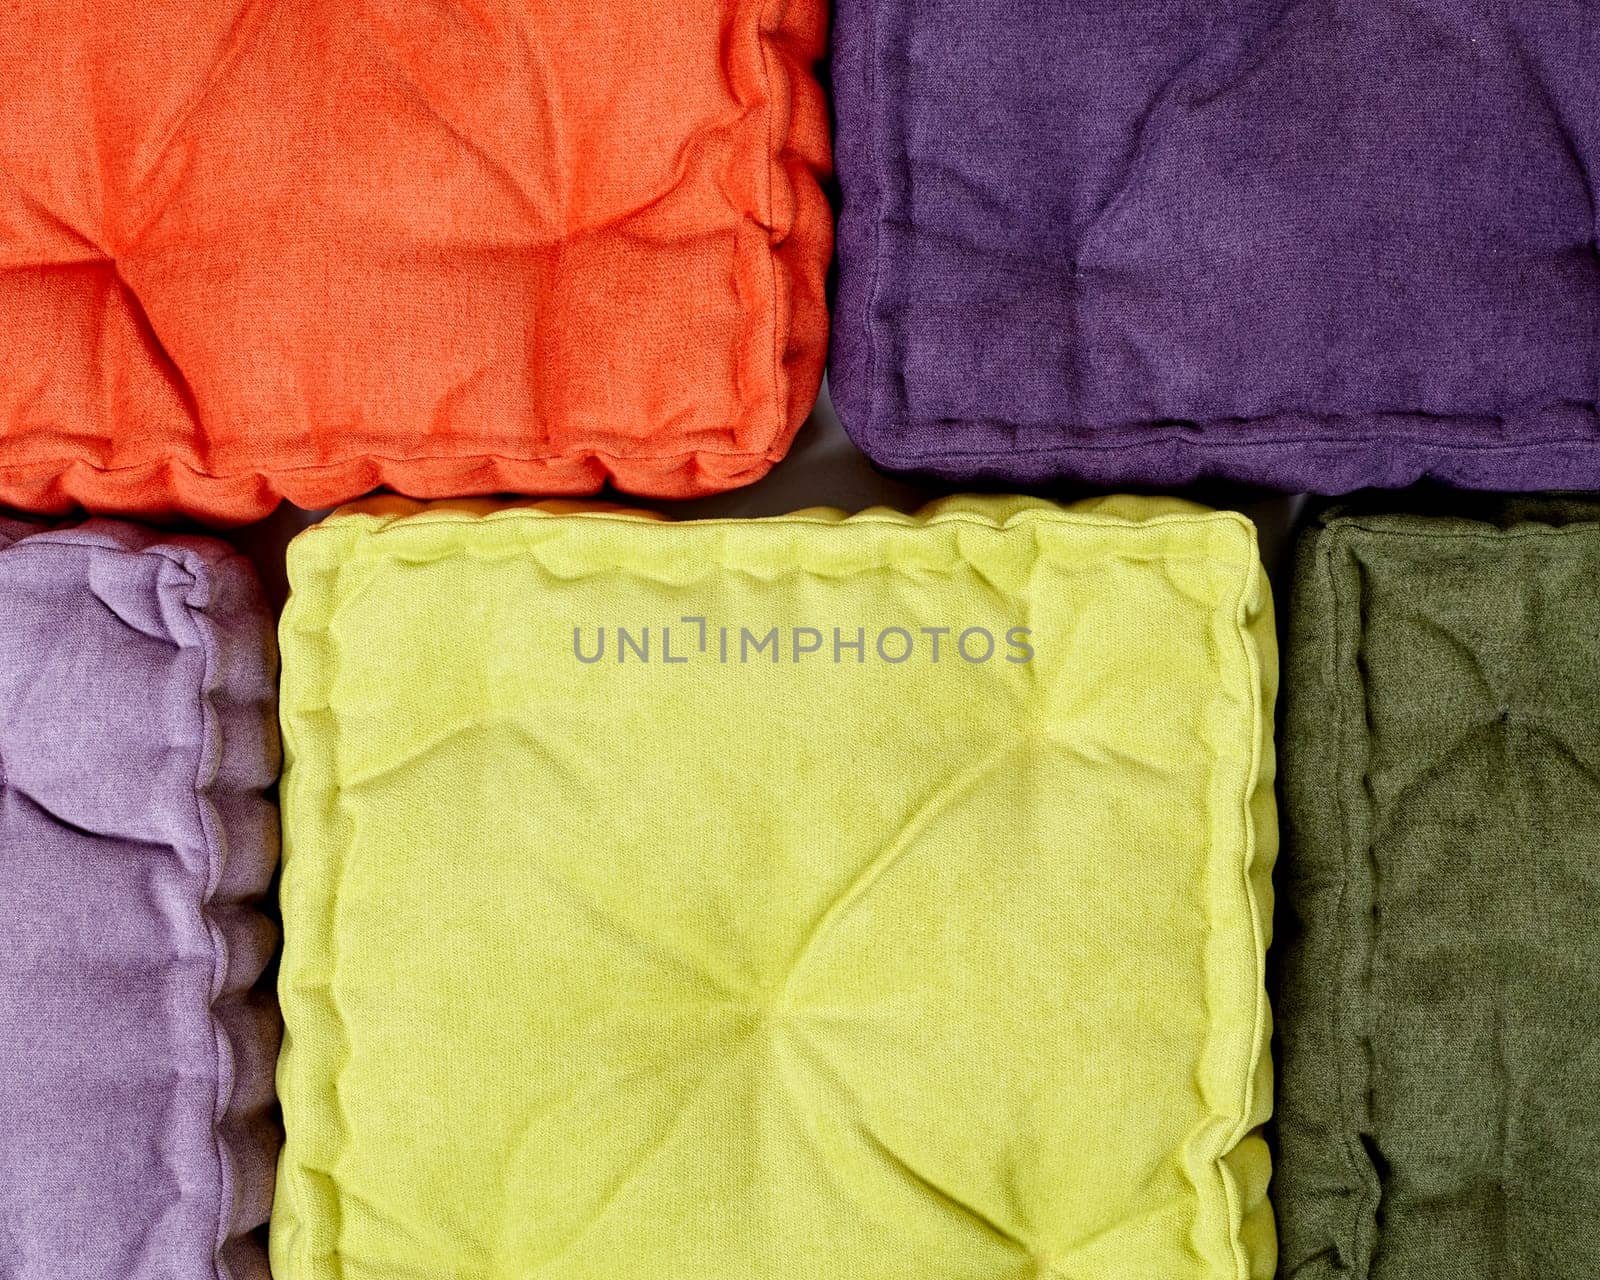 Top-down perspective of neatly arranged velour quilted cushions in bright orange, purple, yellow, and green. Handcrafted accessories for comfort and stylish interior design